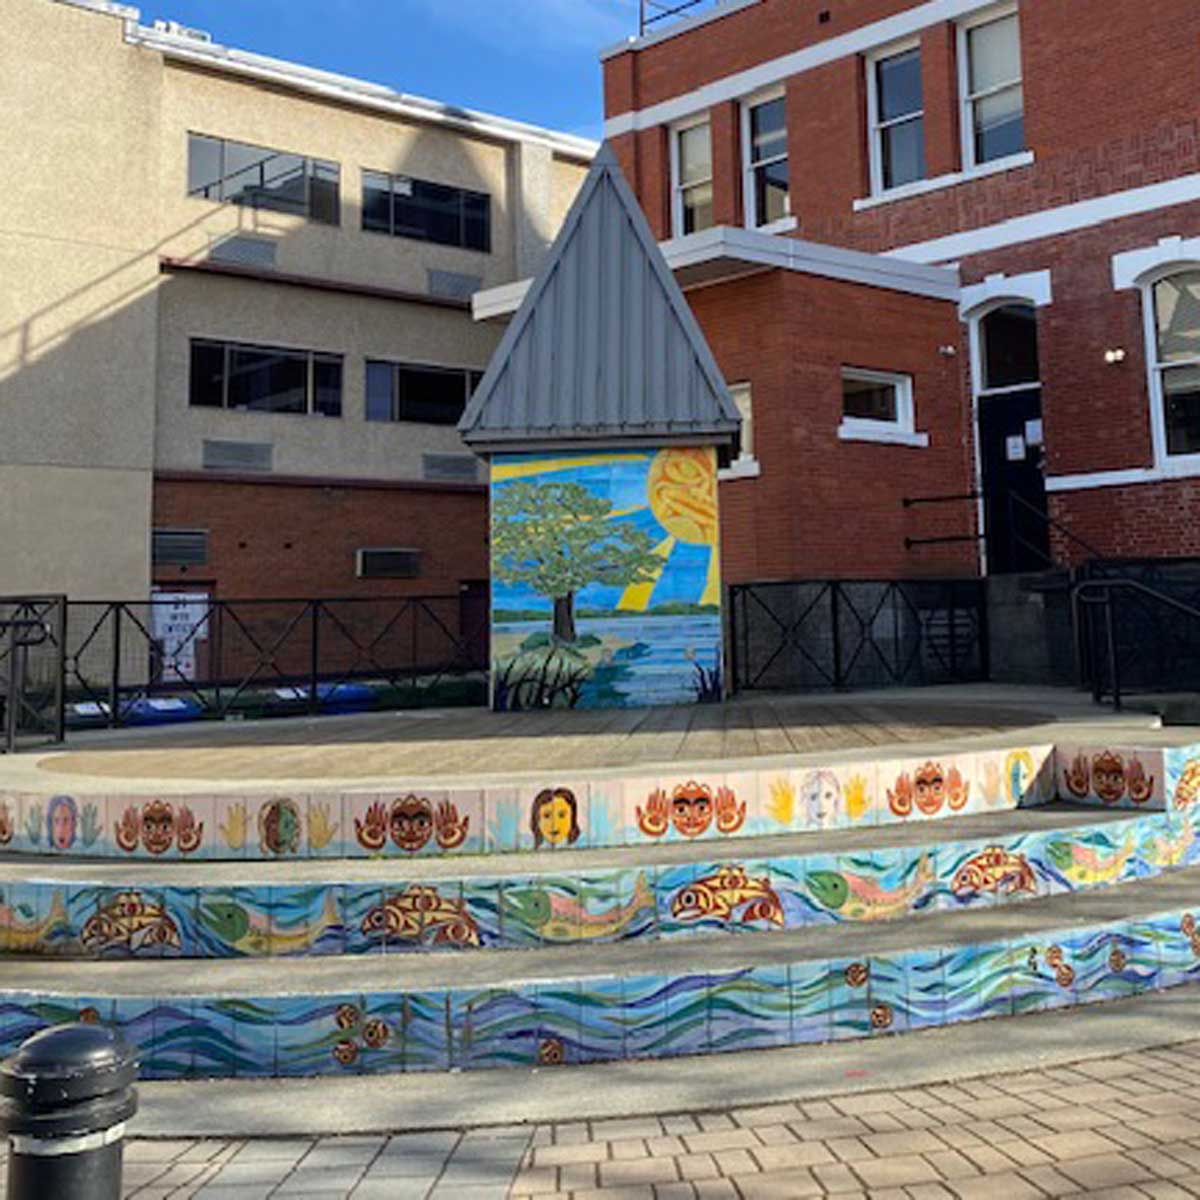 A public mural in Duncan, BC depicting sunshine